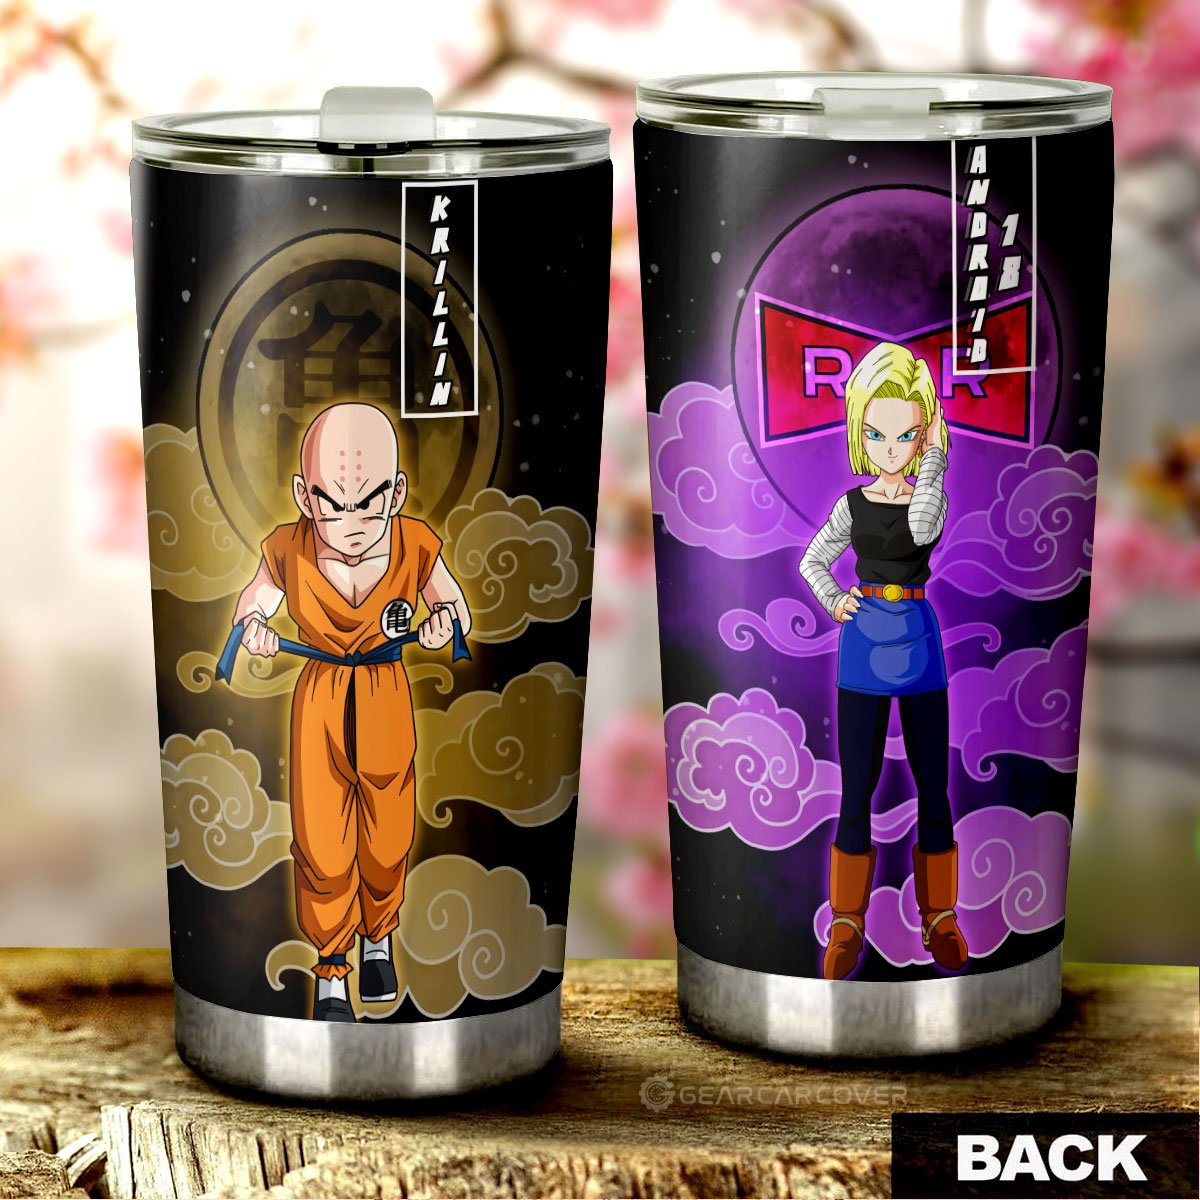 Krillin And Android 18 Tumbler Cup Custom Dragon Ball Anime Car Accessories - Gearcarcover - 1